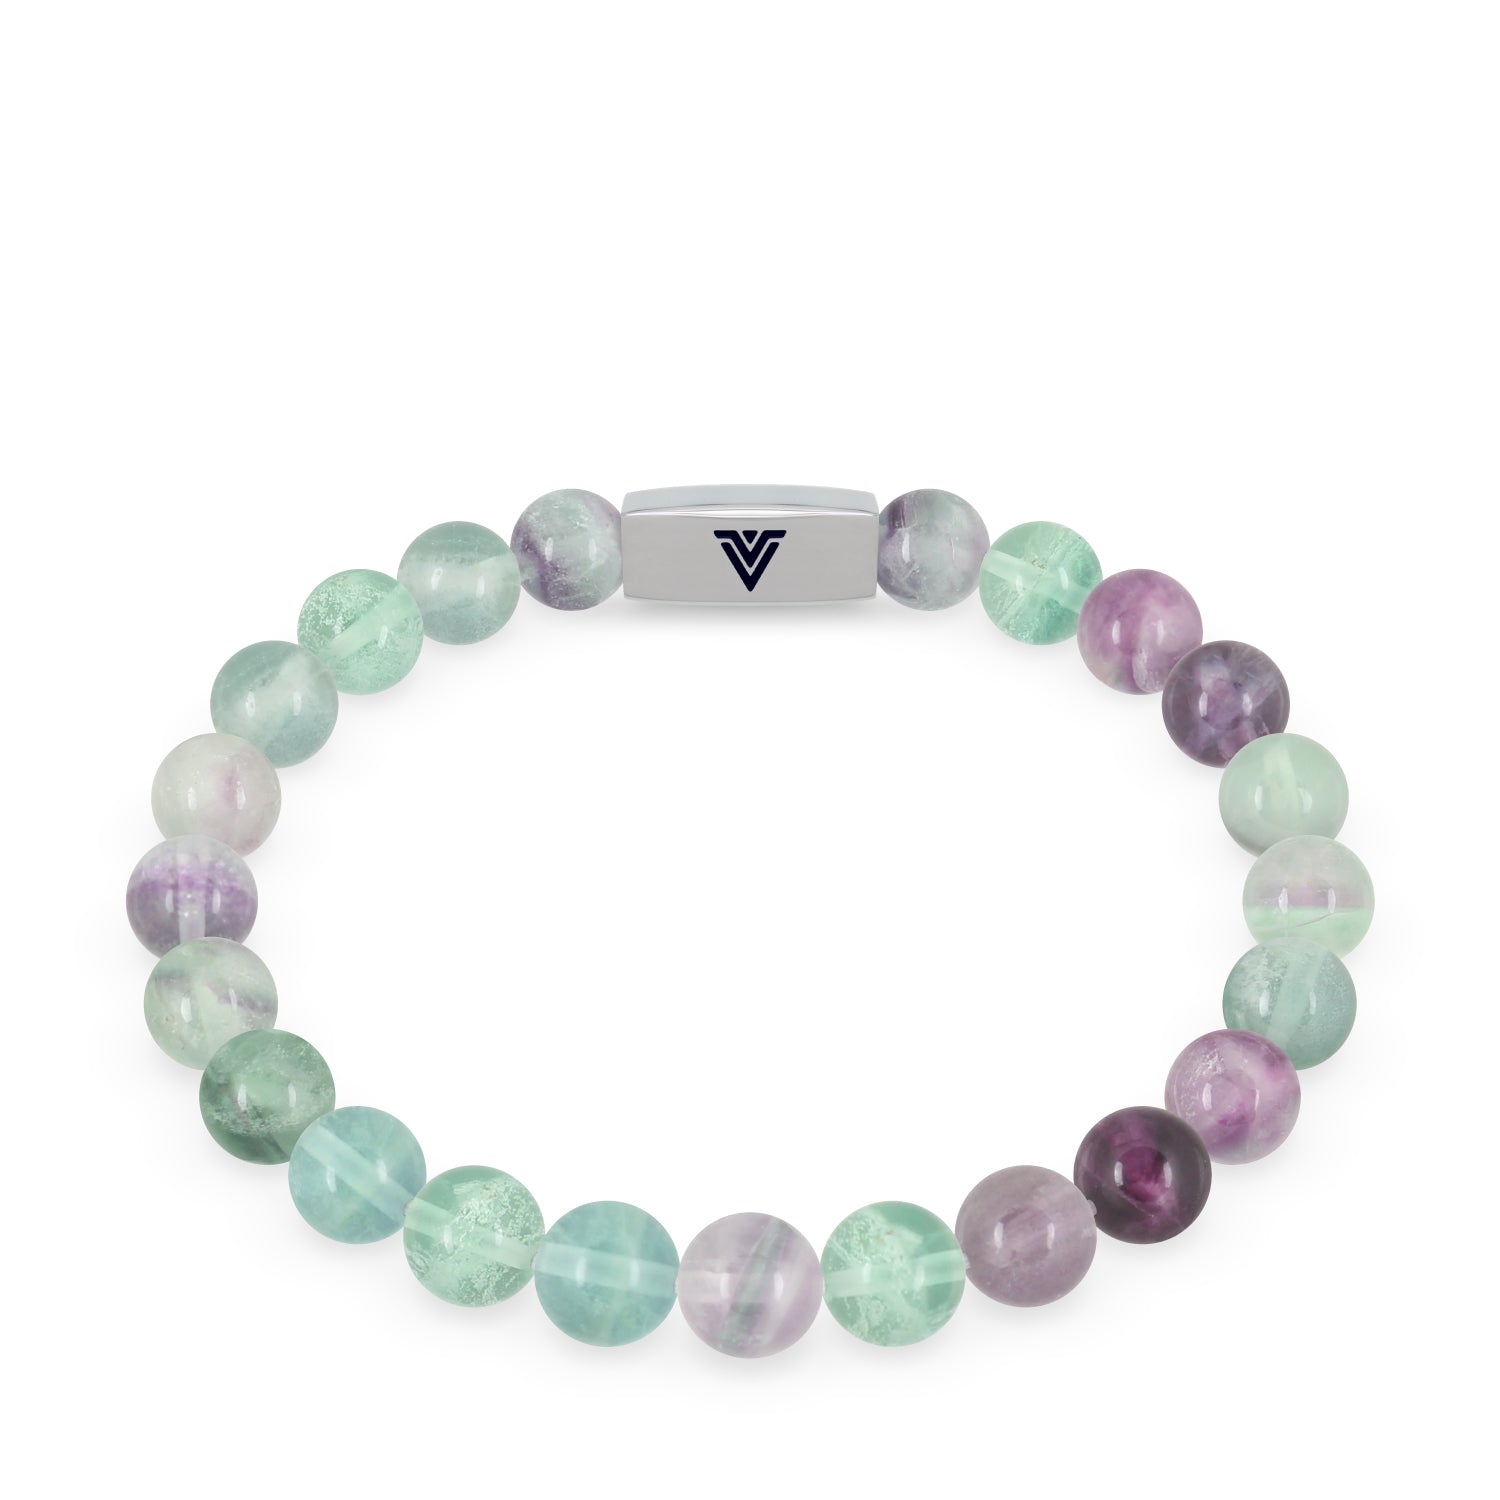 Front view of an 8mm Fluorite beaded stretch bracelet with silver stainless steel logo bead made by Voltlin